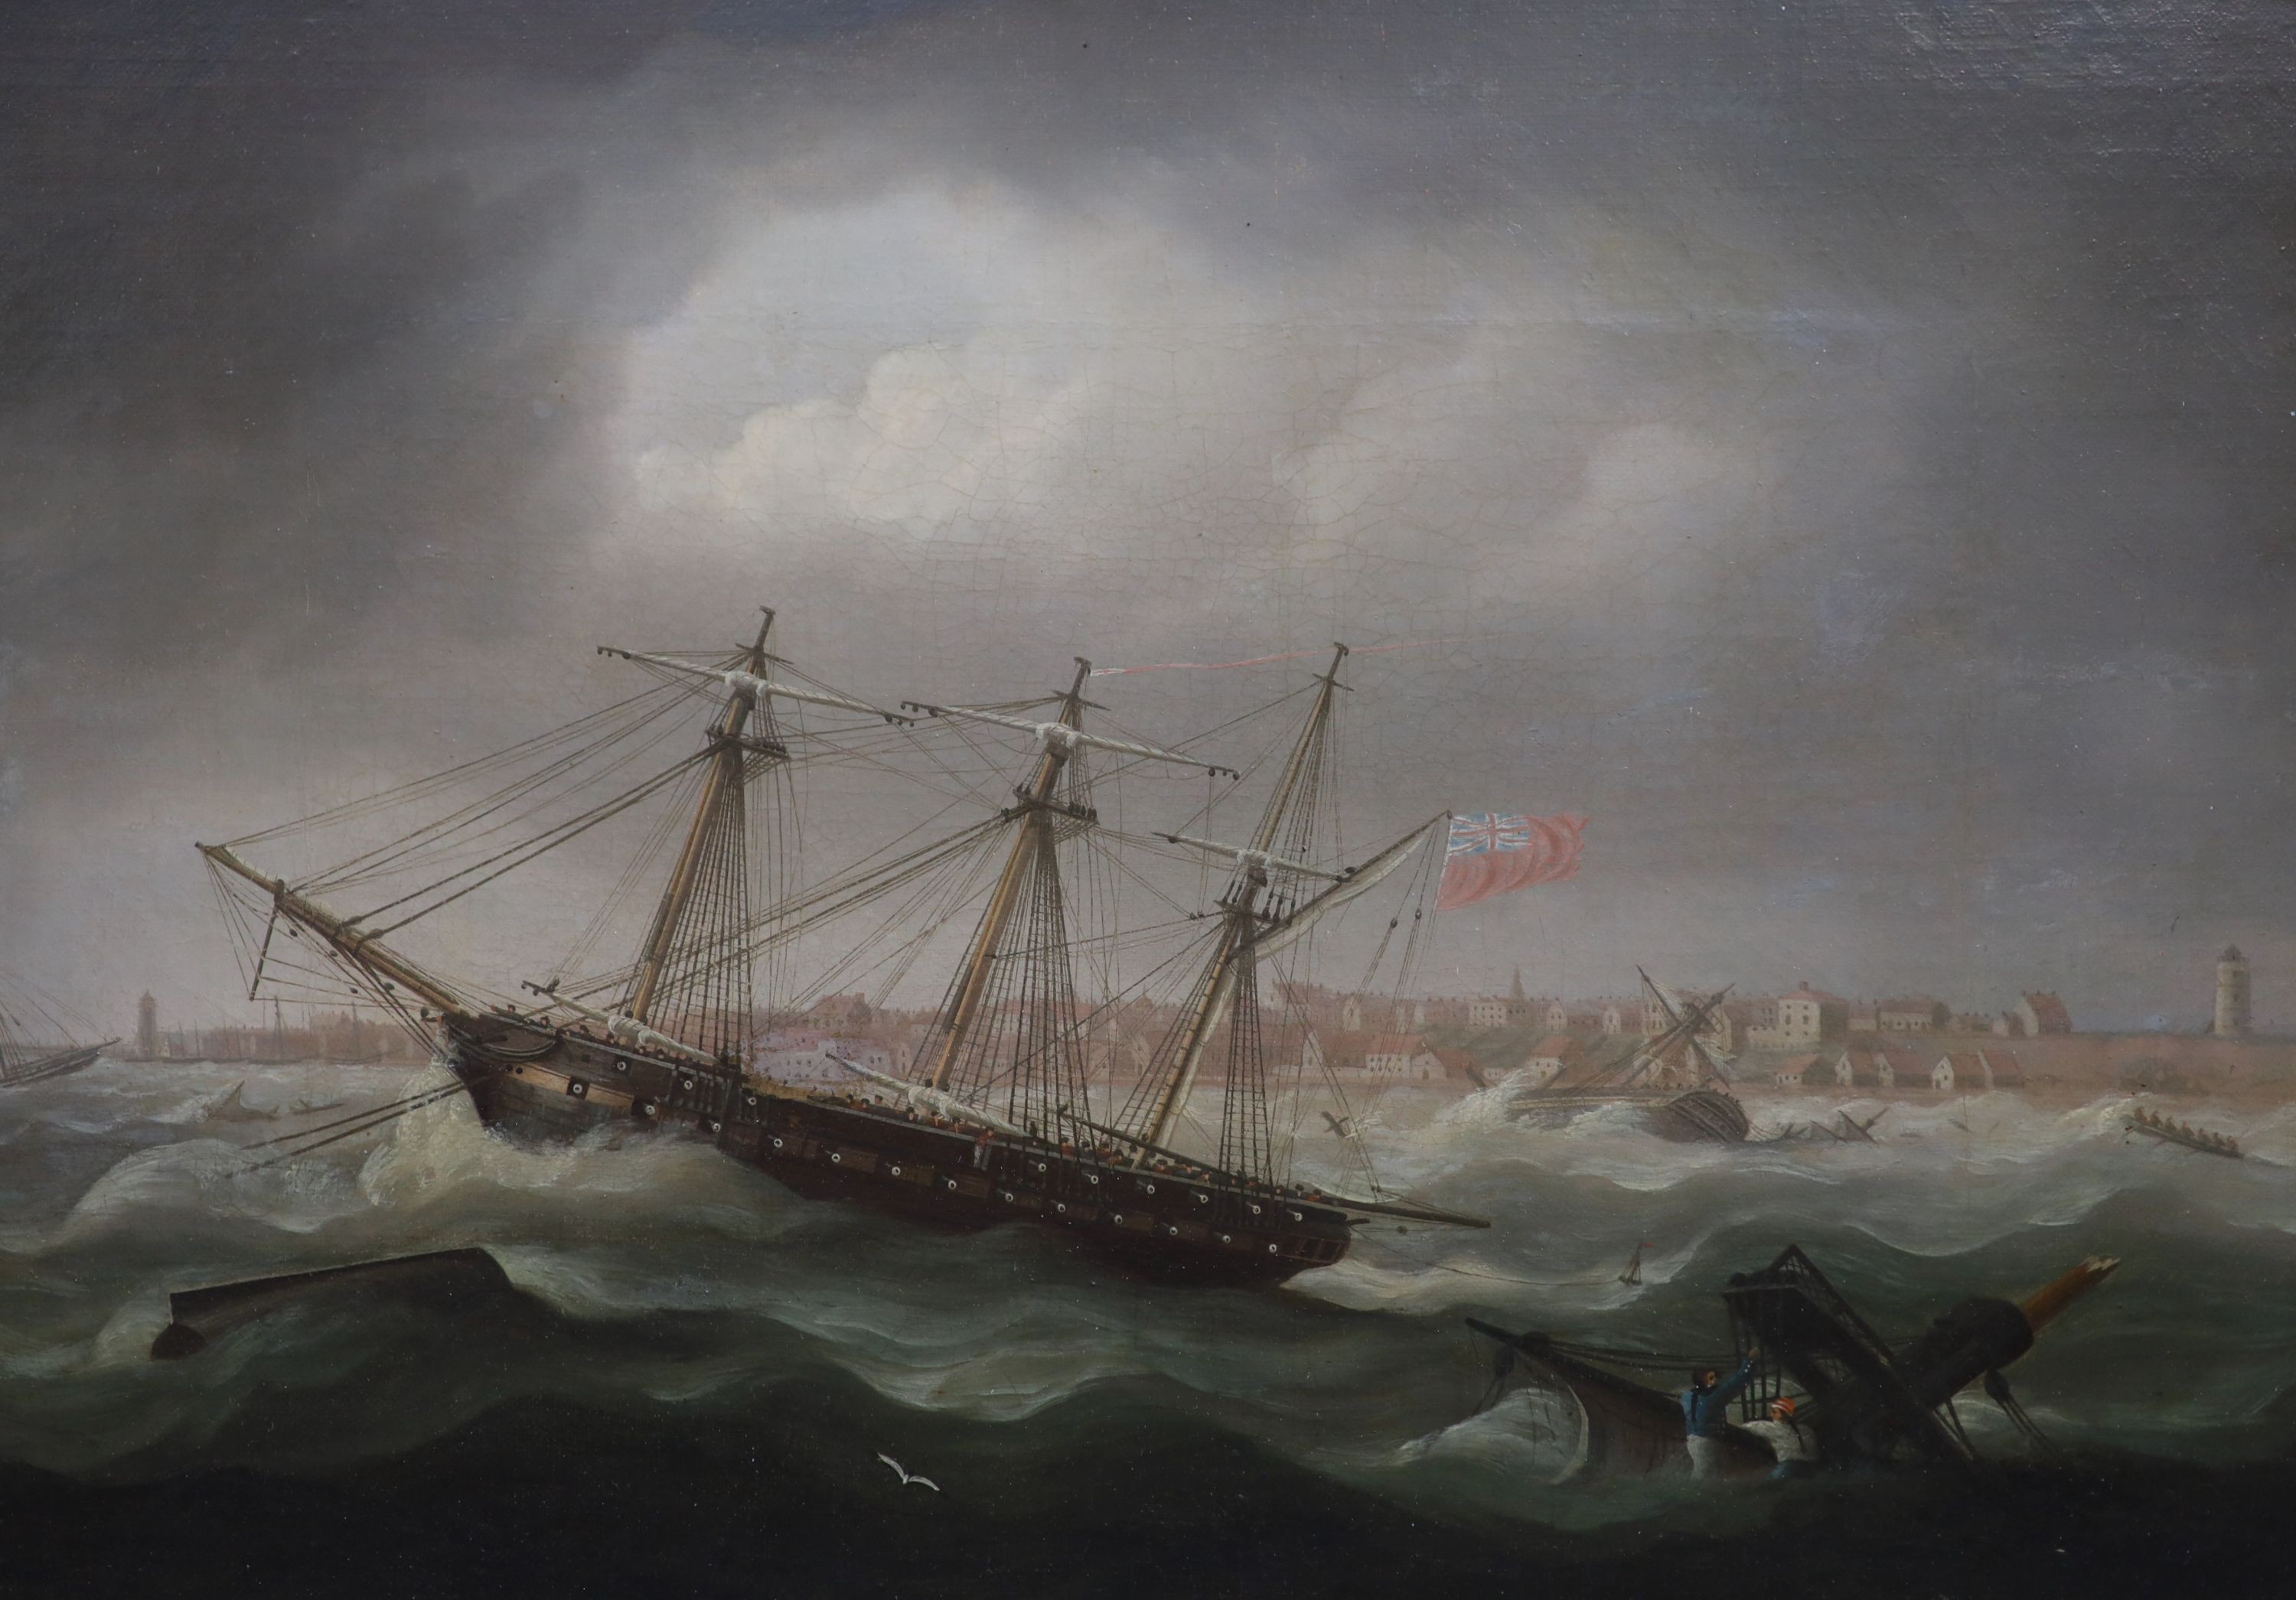 Thomas Buttersworth (1768-1842), The Great Storm of 1814, oil on canvas, 29.5 x 42cm